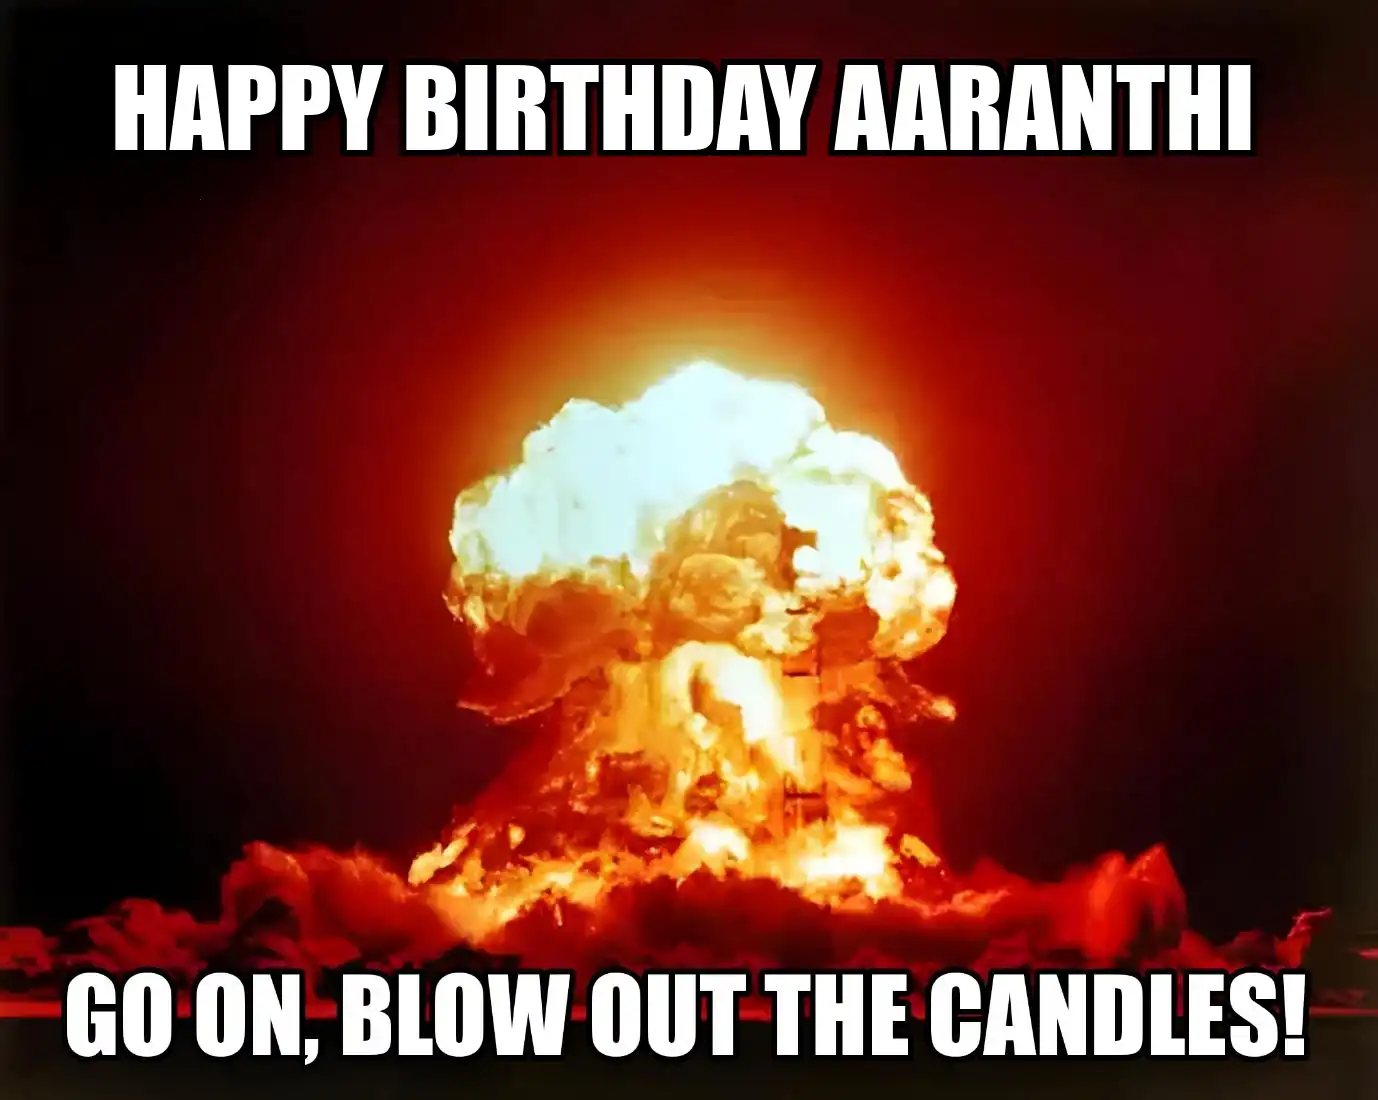 Happy Birthday Aaranthi Go On Blow Out The Candles Meme